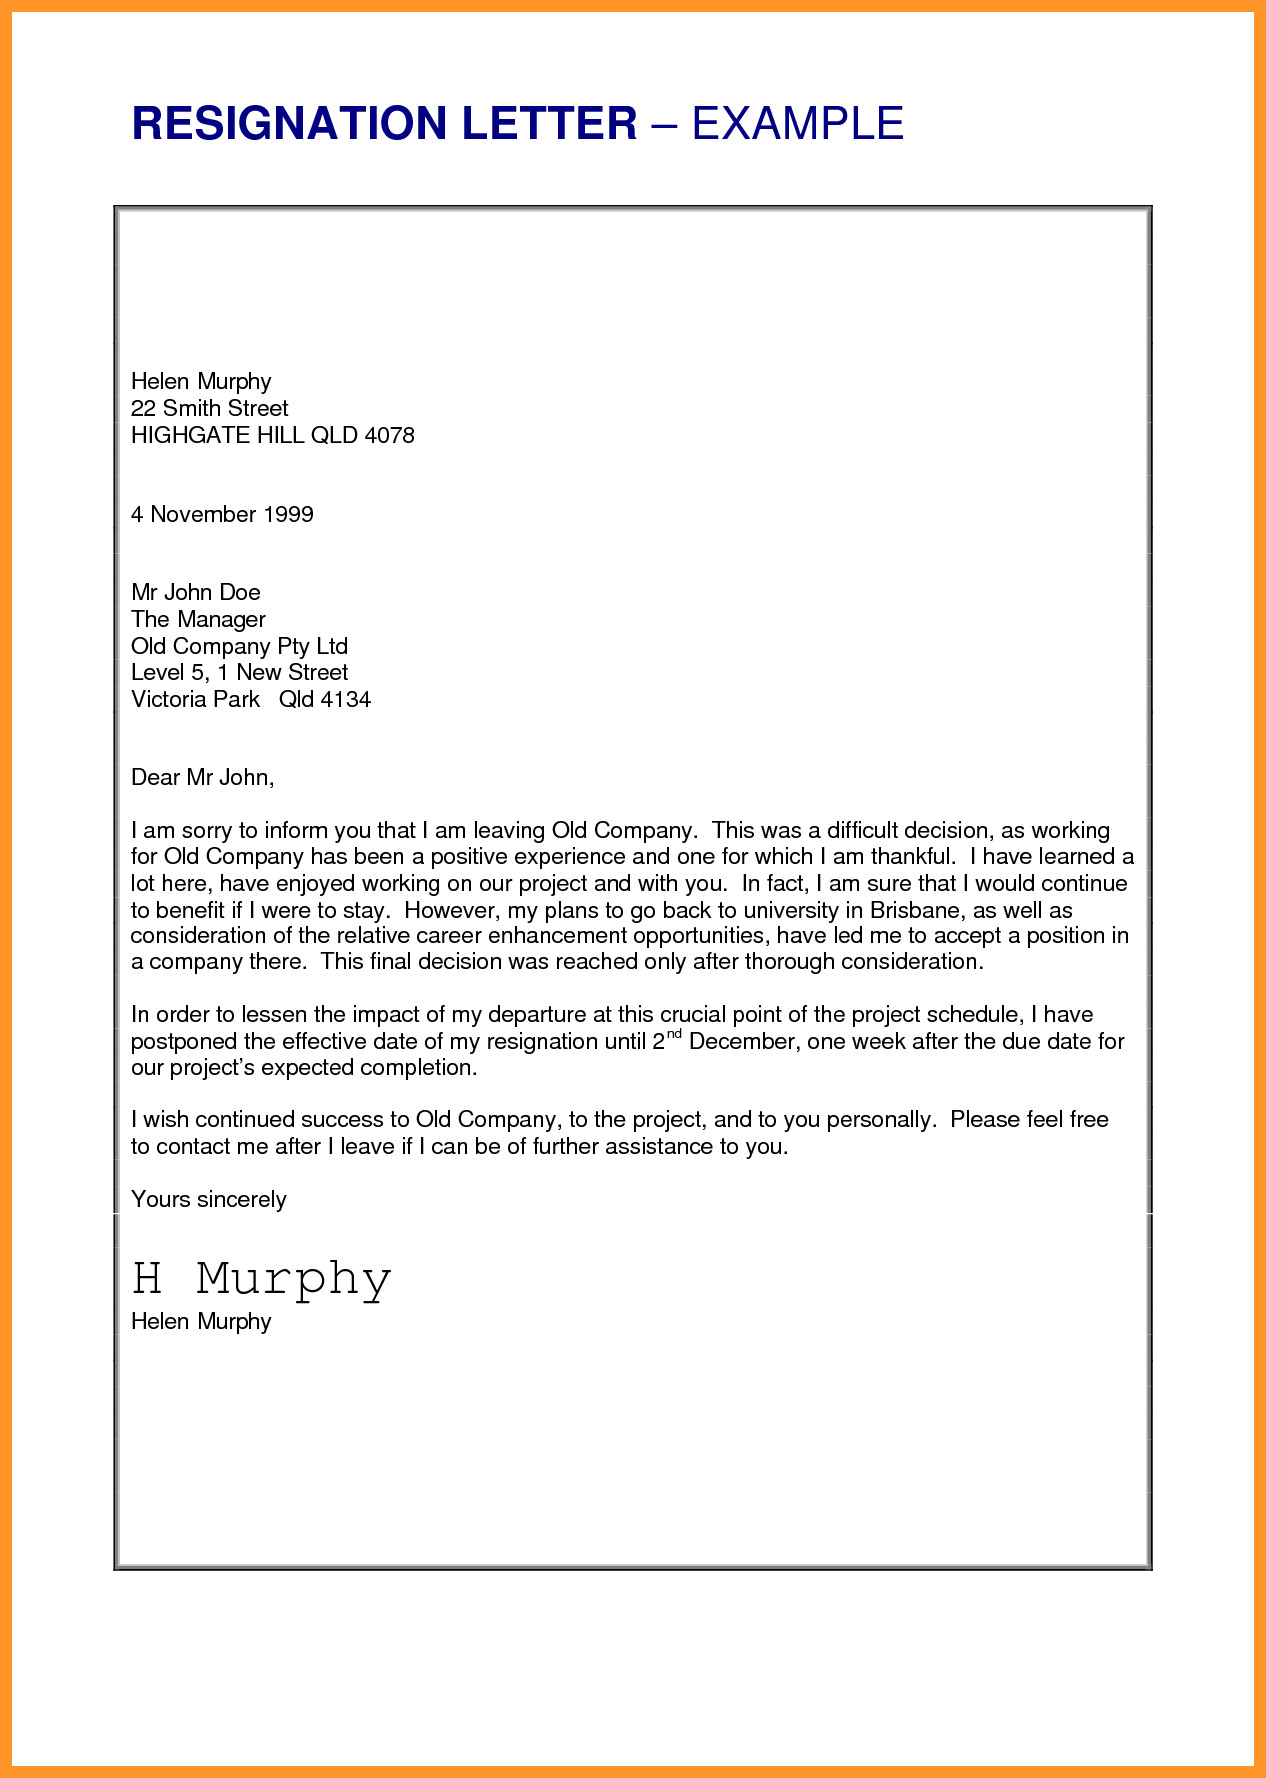 Letter Of Resignation Template 10 11 Sample Letters Of Resignation From A Job